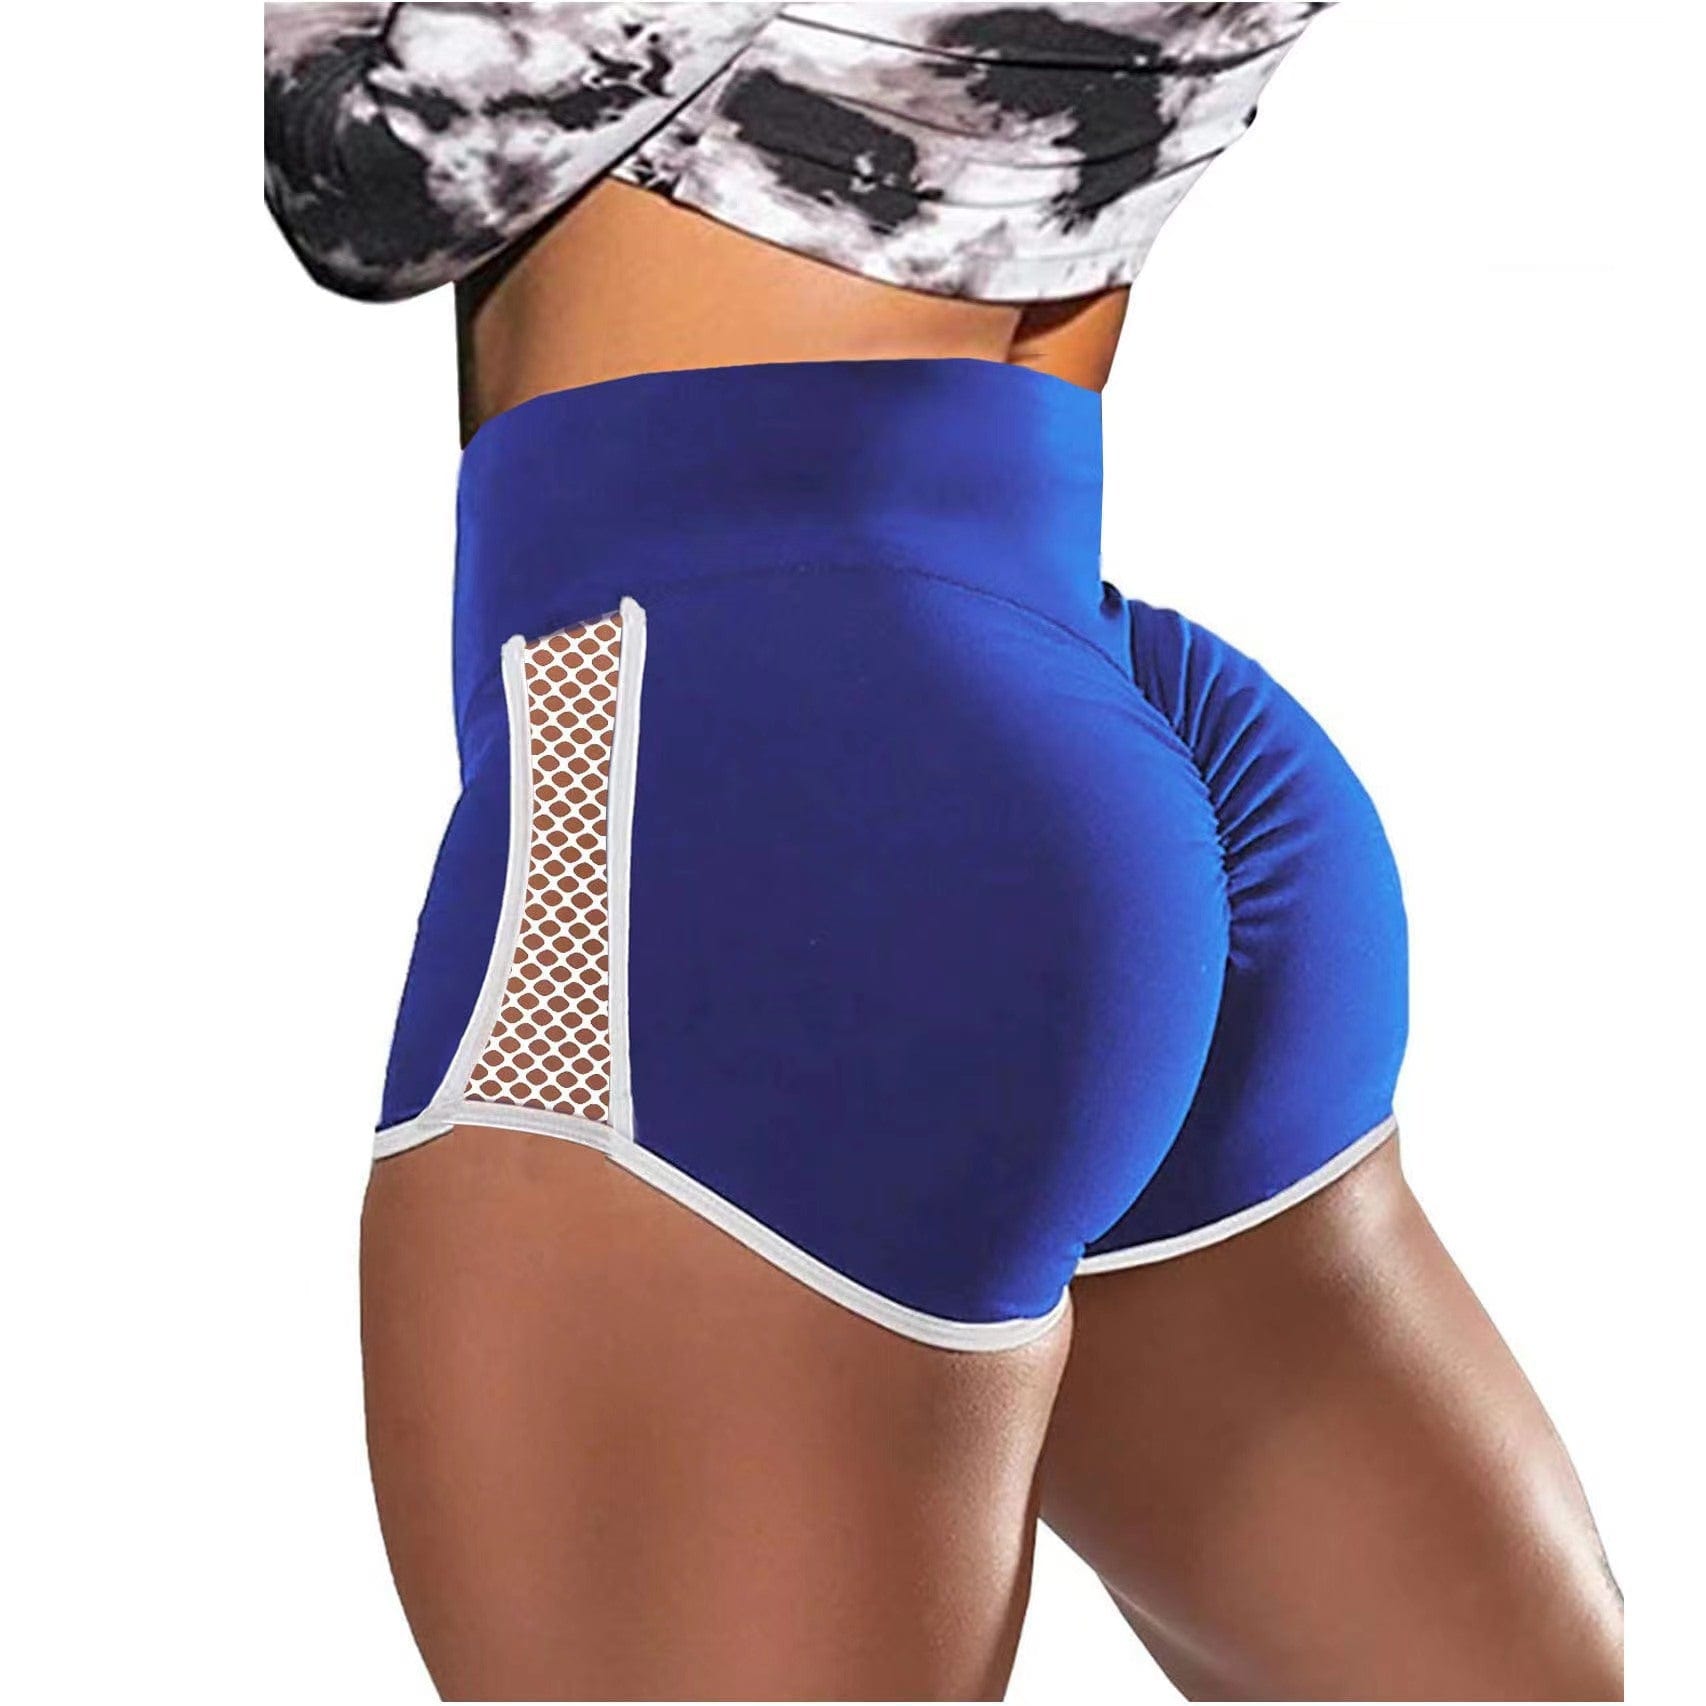 ALLRJ Blue / L Cross-border European And American Foreign Trade Shorts High Waist Shaping Shorts Fitness Sports Pants Hollow Out Stitching Shorts